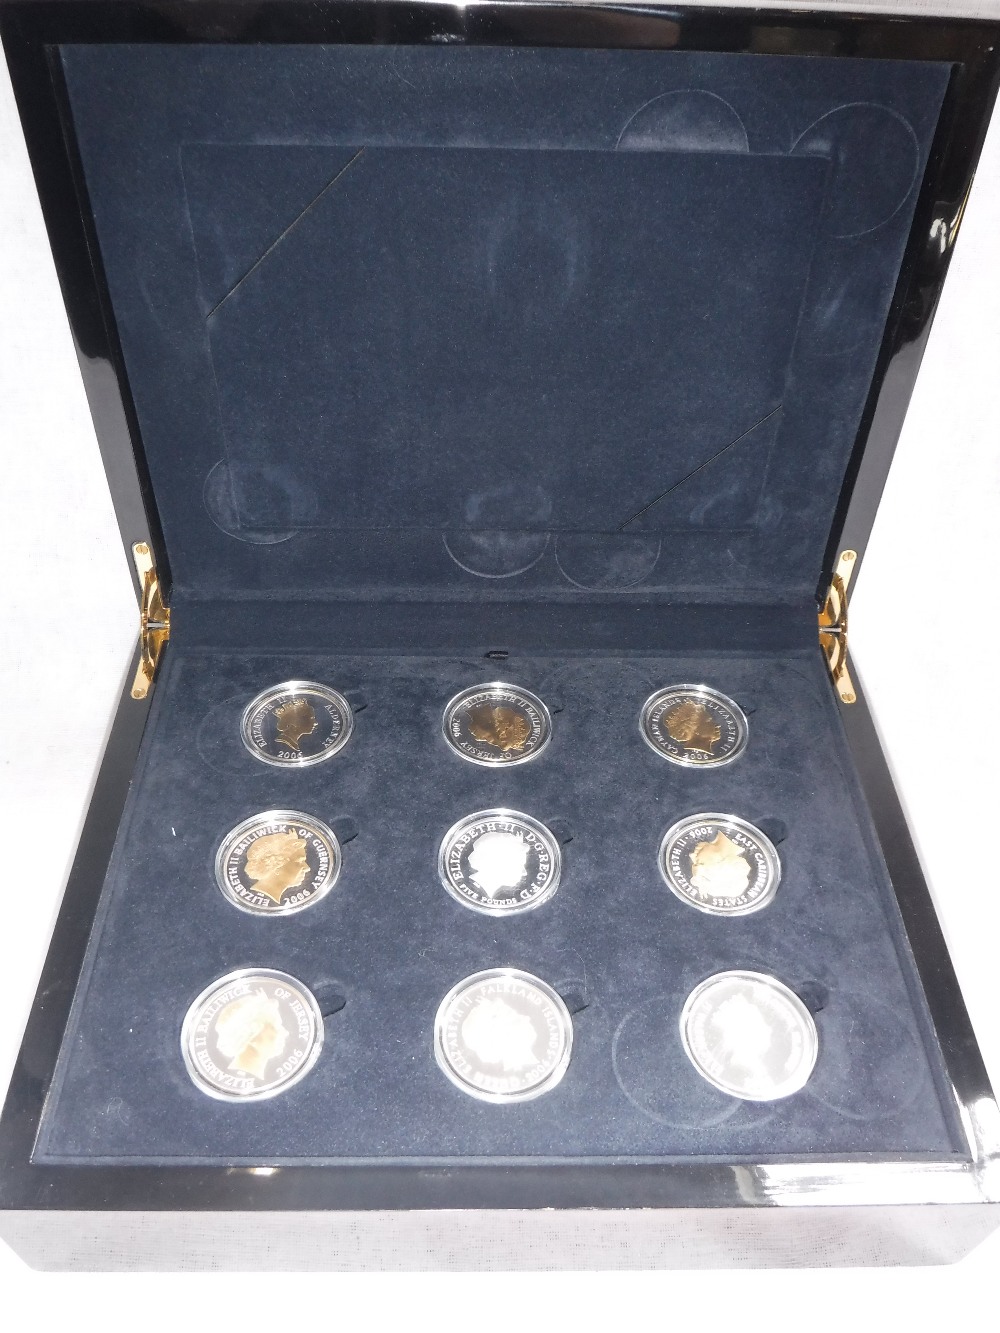 A CASED SET OF THE QUEEN'S 80TH BIRTHDAY SILVER PROOF COIN COLLECTION, eighteen coins